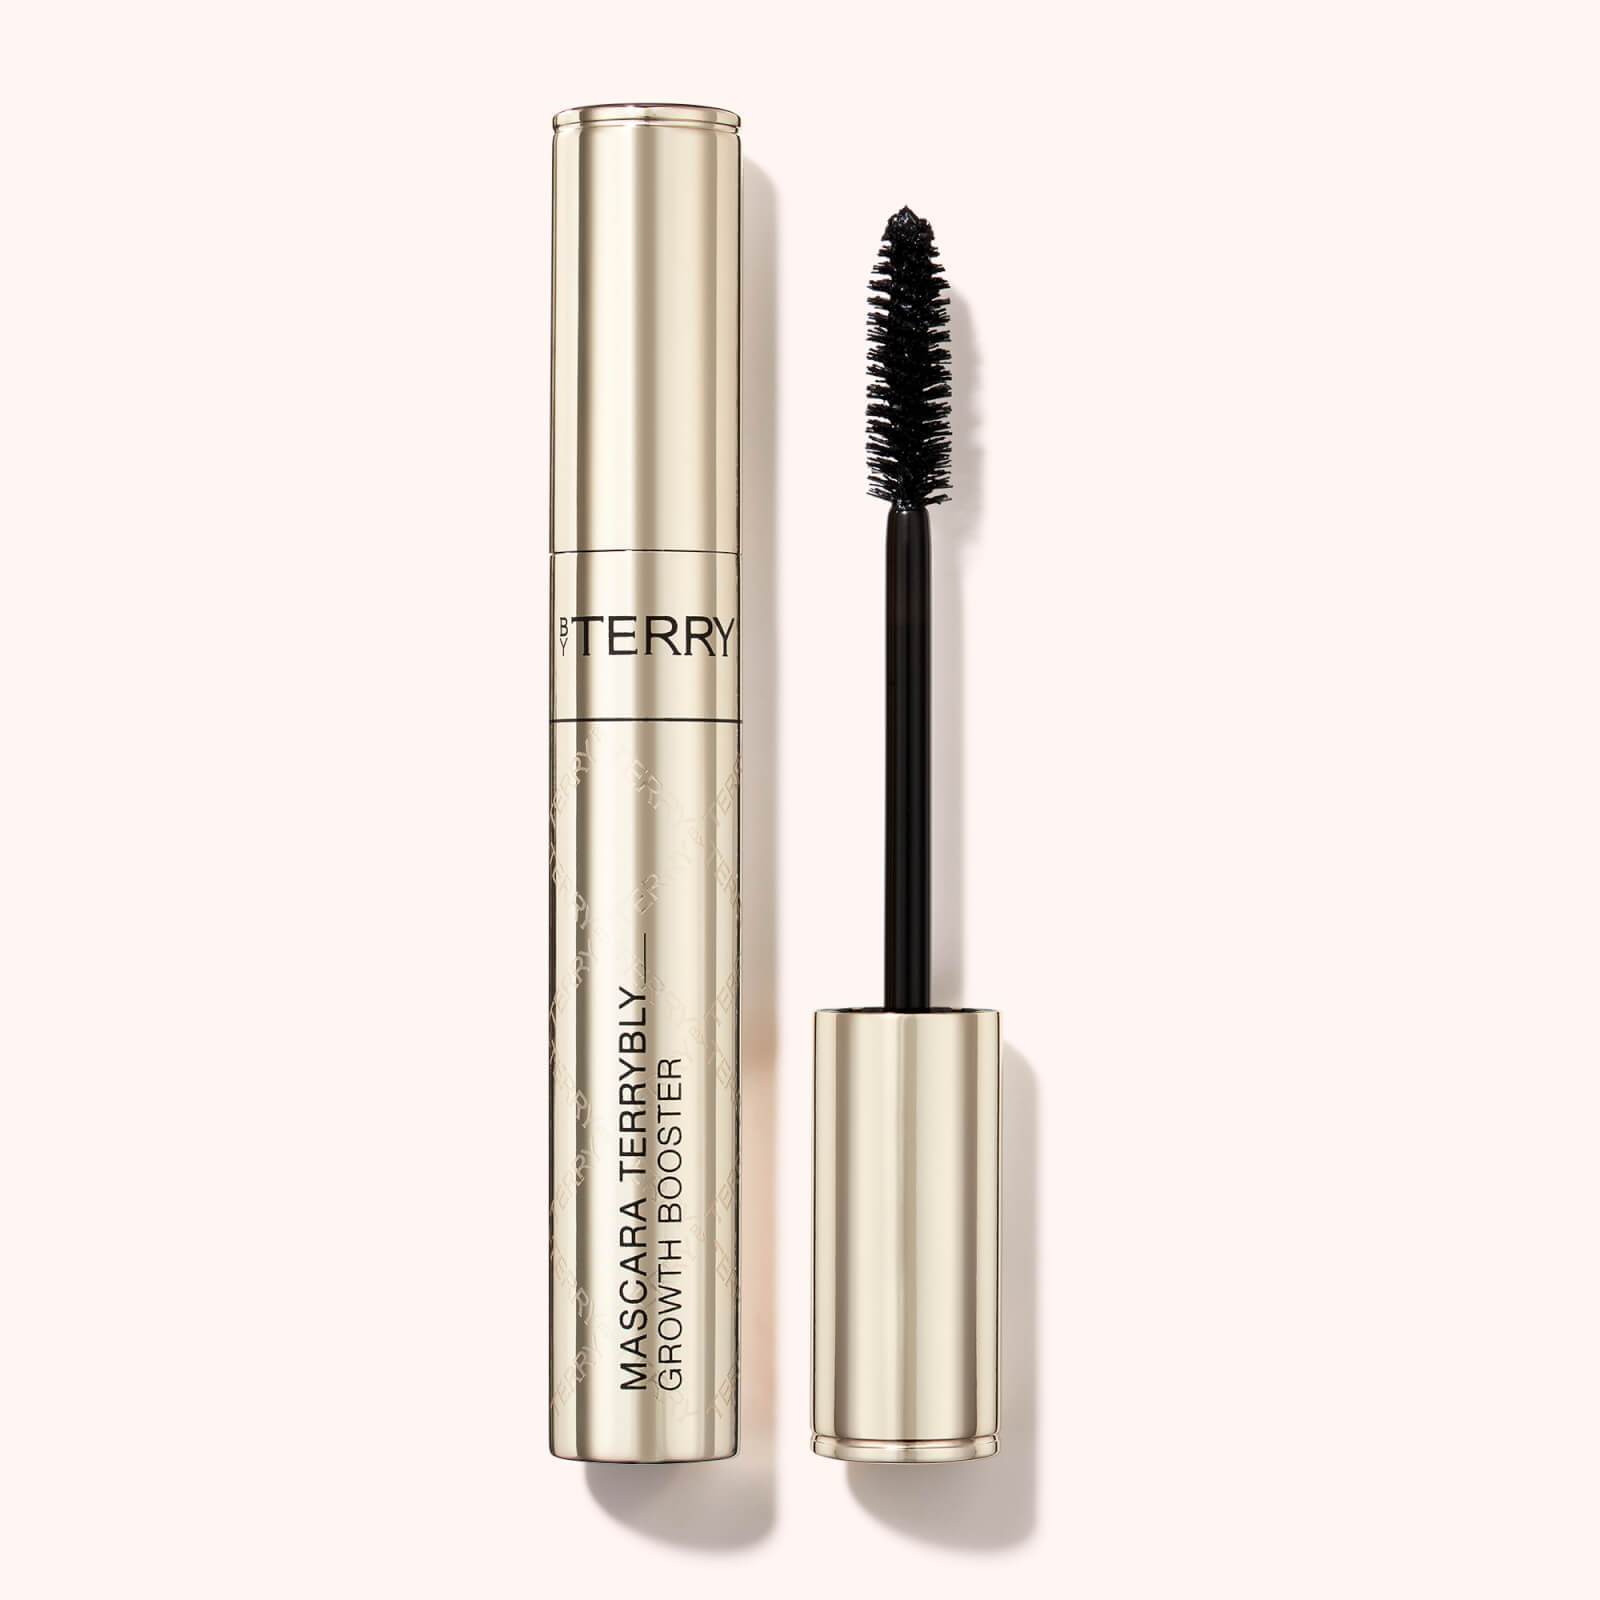 By Terry Terrybly Mascara 8 Ml (Forskellige Nuancer) - 1. Black Parti-Pris